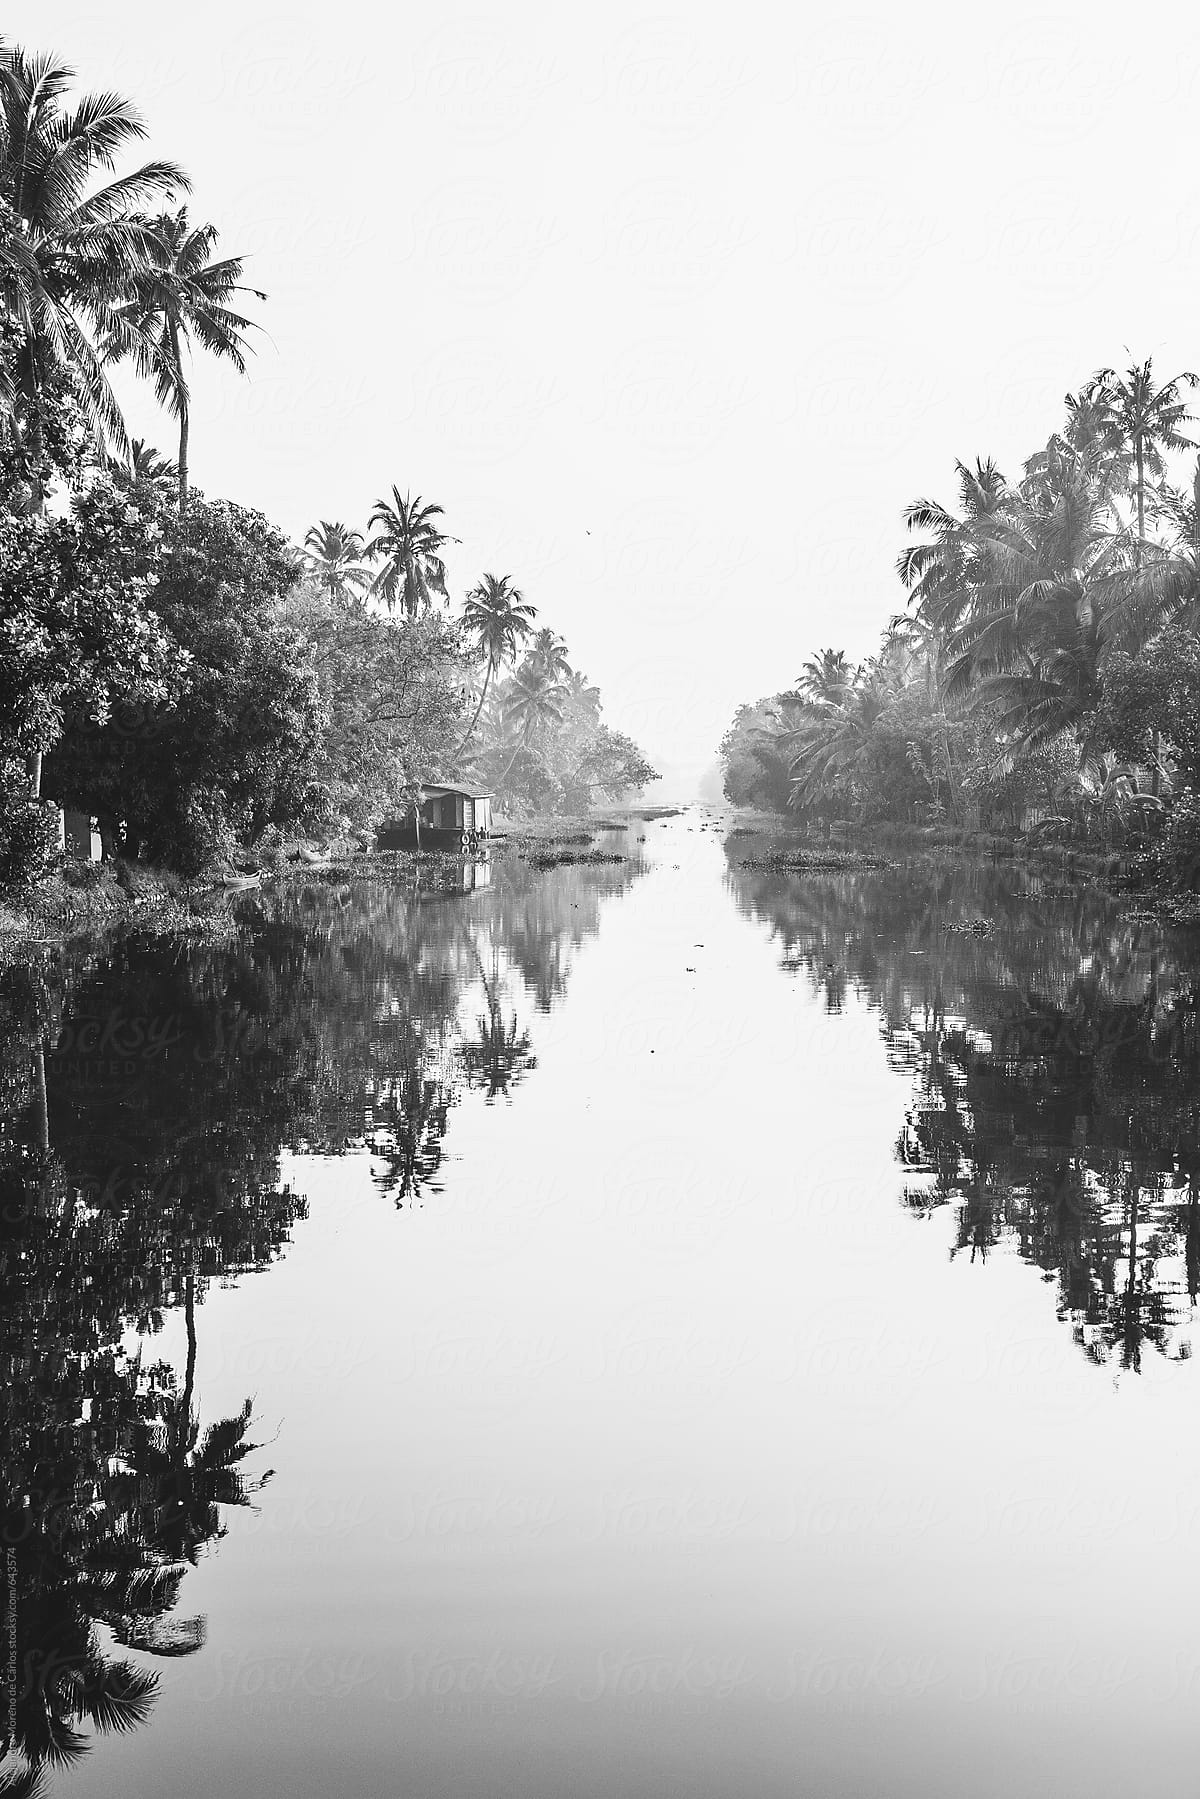 River and jungle with reflection of palm trees on the water in black and white. Kerala, India